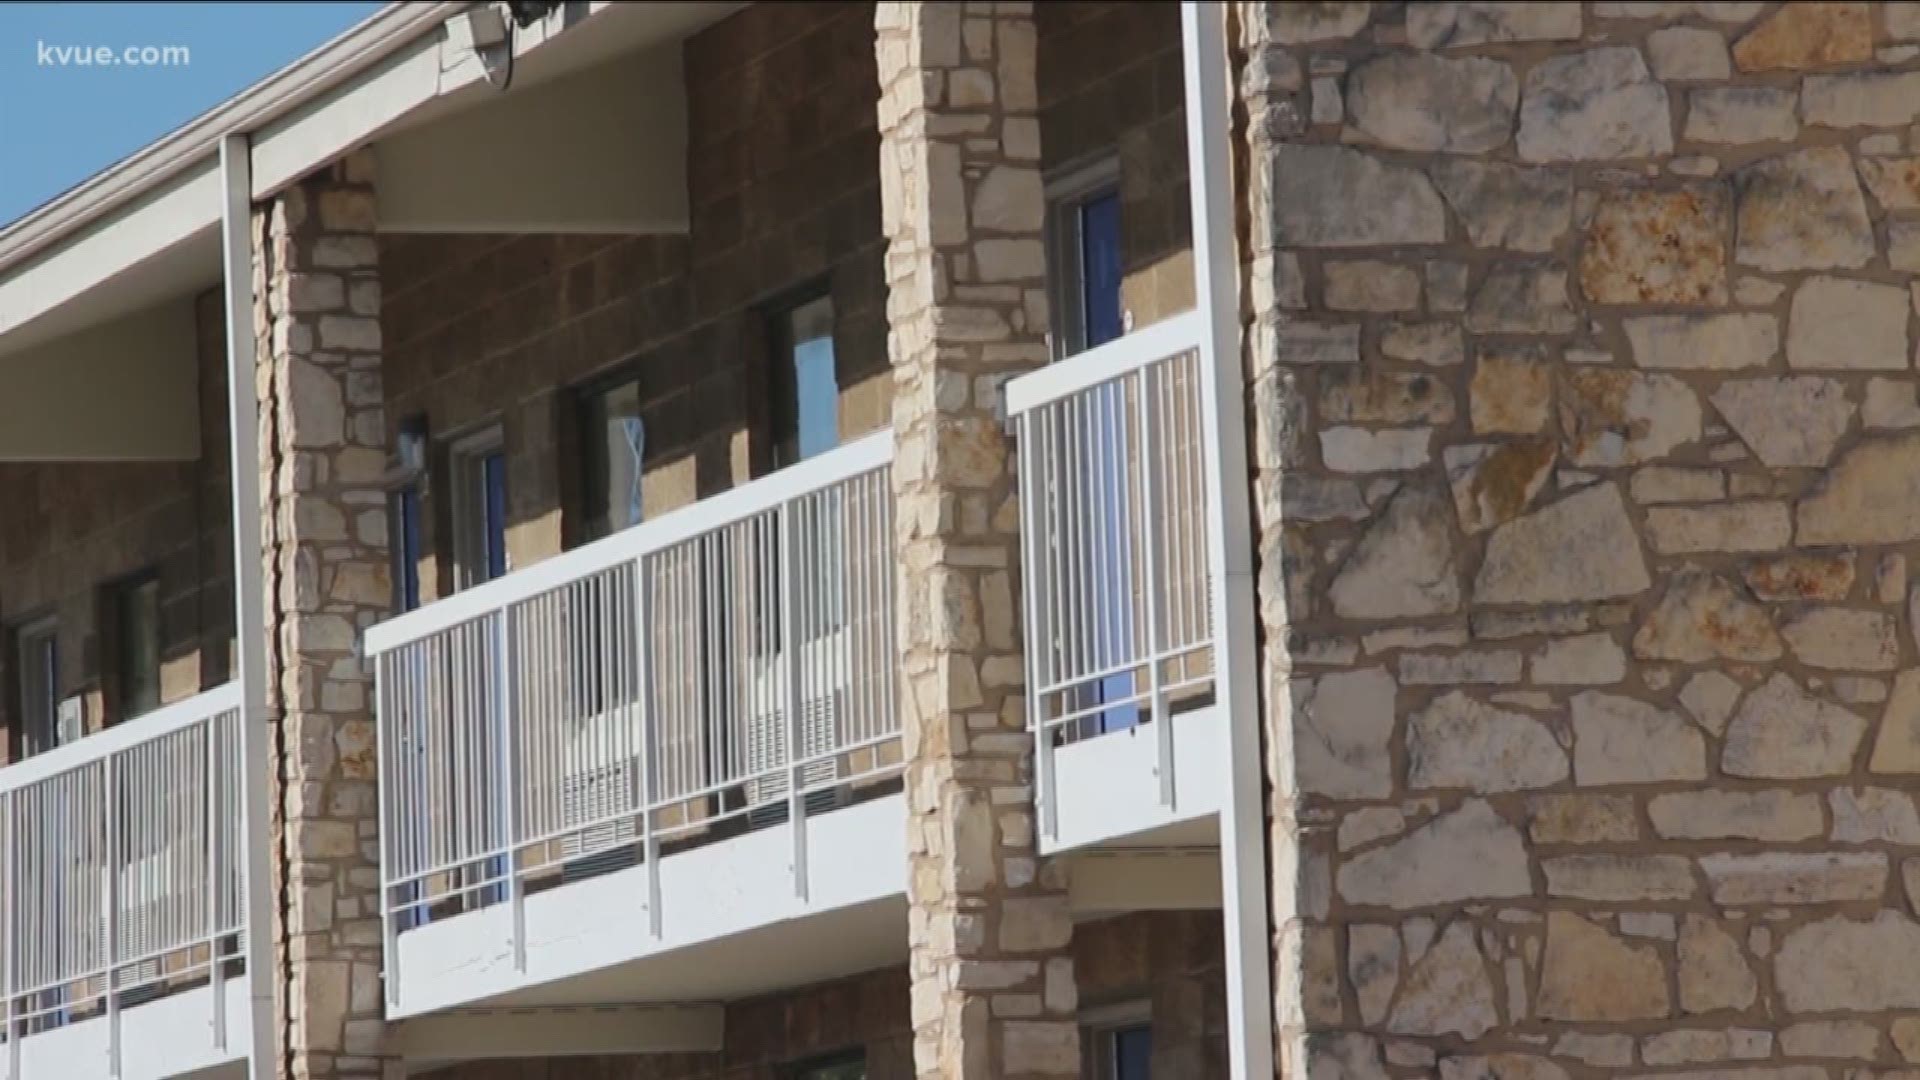 A woman is suing a motel in Austin, claiming three men sexually assaulted her and motel staff didn't do anything to help her.